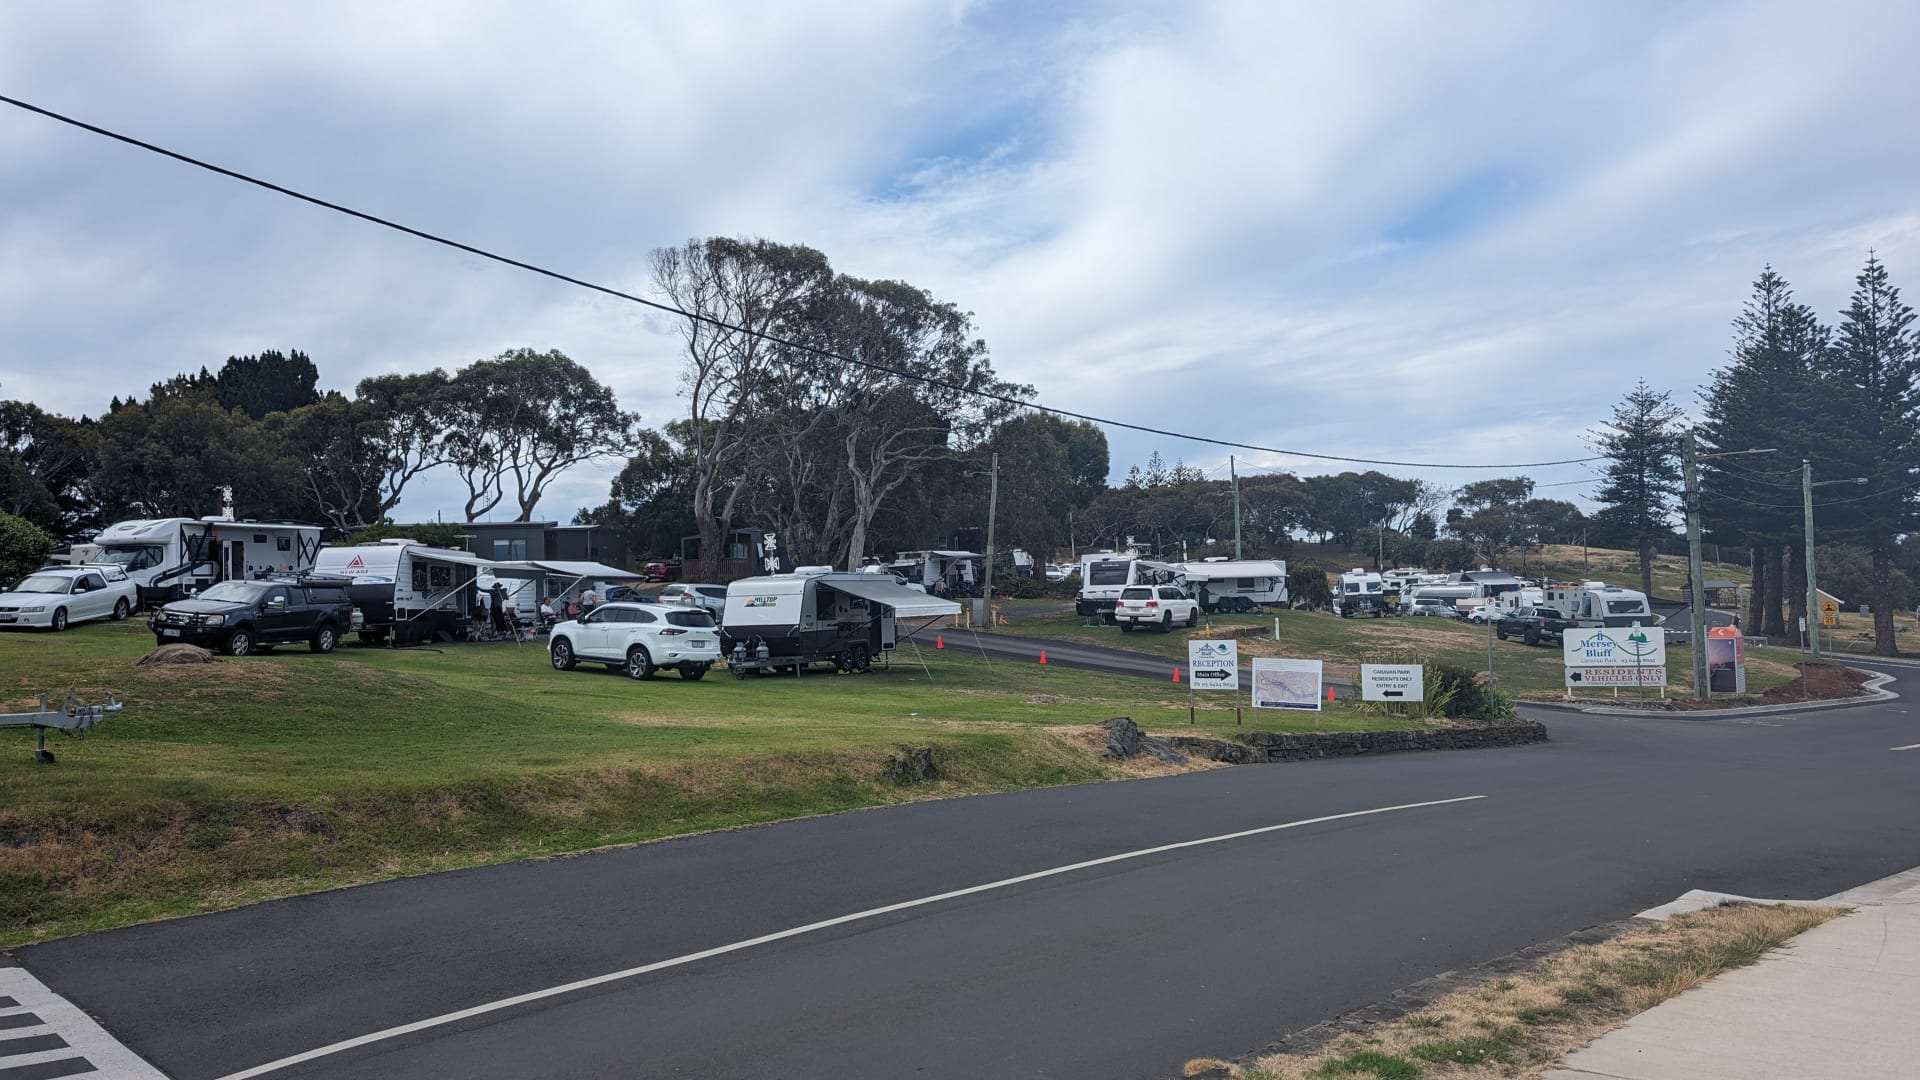 Caravan park in Australia with vehicles and trees.